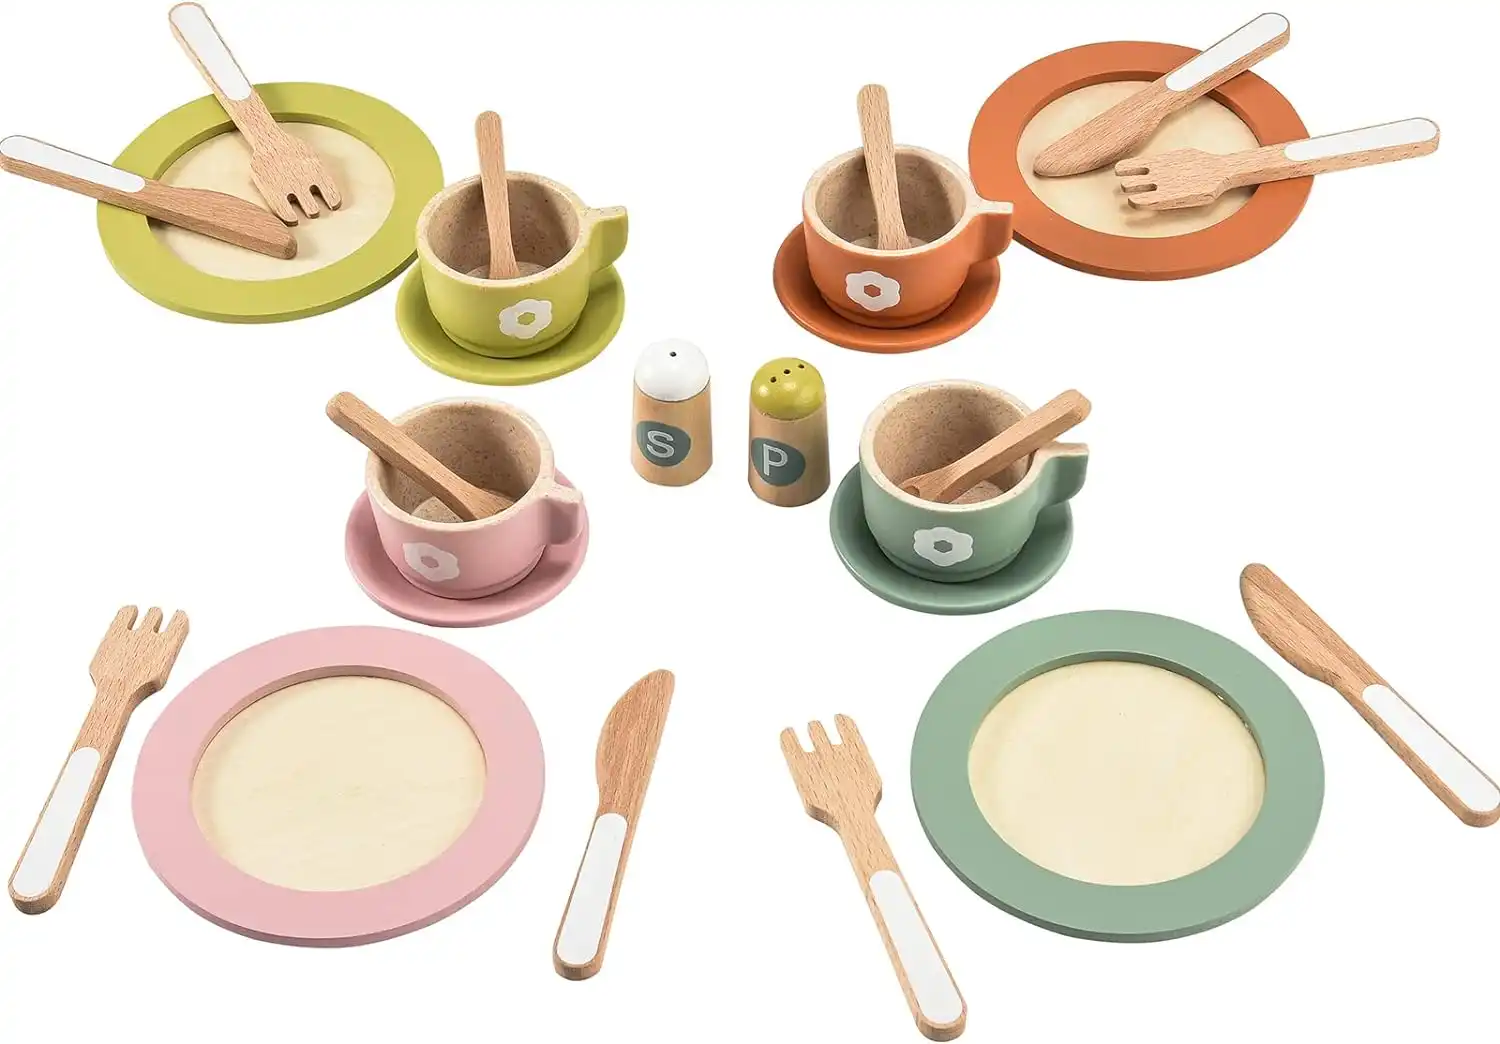 Wooden Toy Plates and Dishes